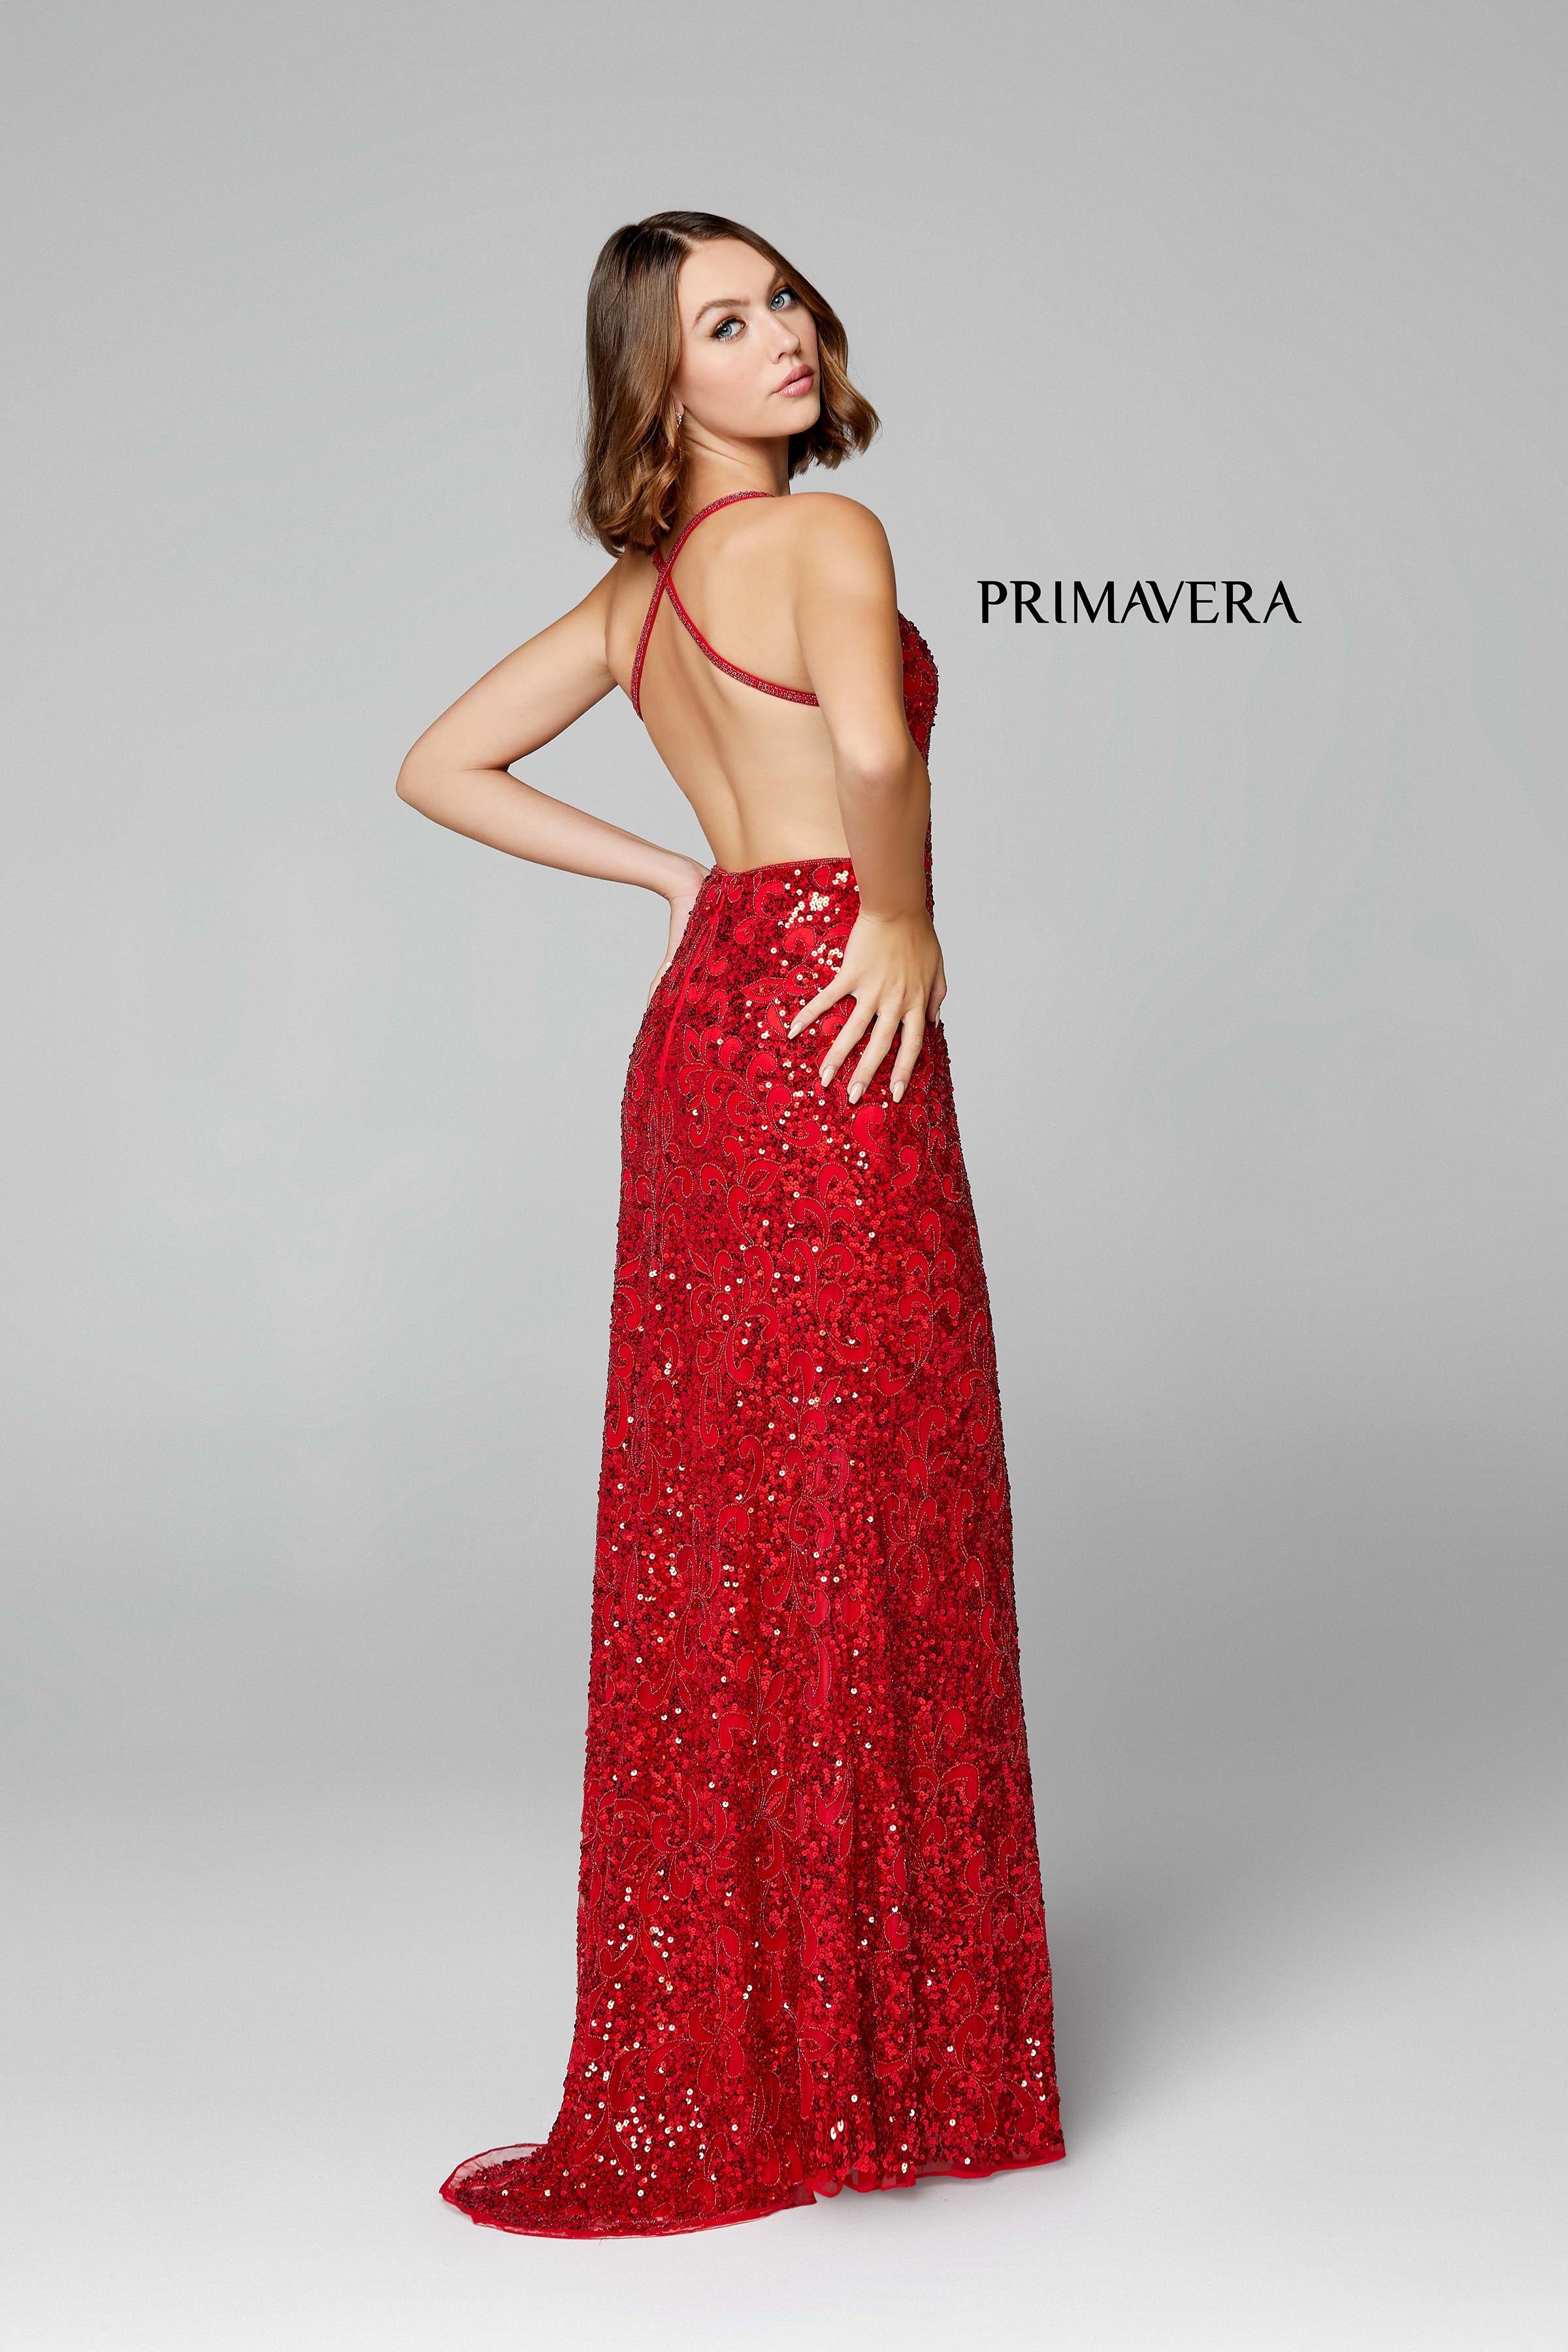 Full Sequin Beaded Dress With V Neckline 02 By Primavera Couture -3295